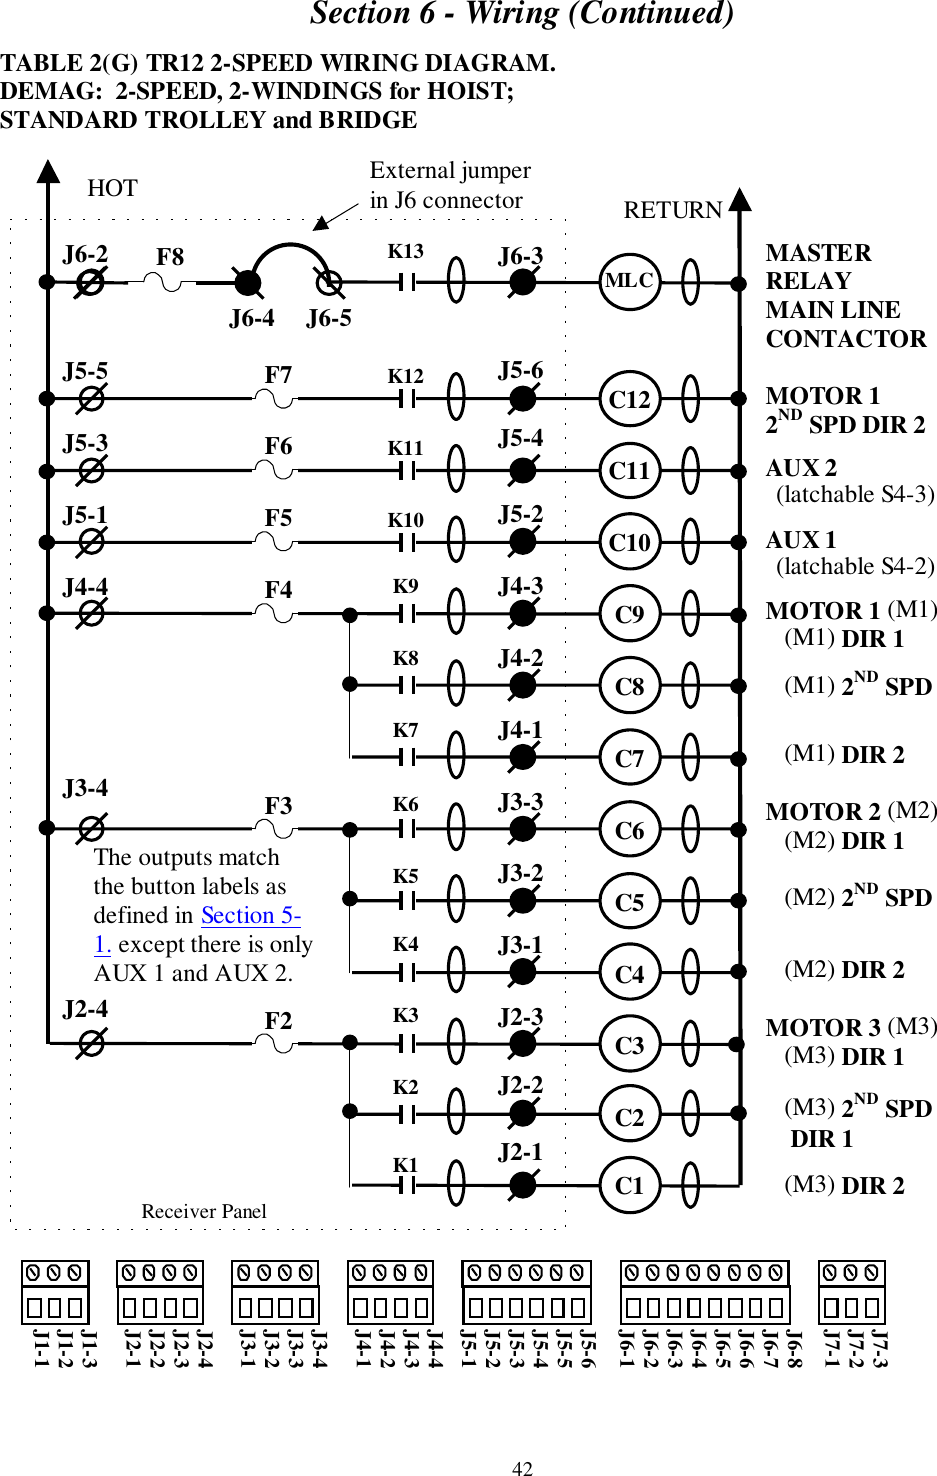 Section 6 - Wiring (Continued)42TABLE 2(G) TR12 2-SPEED WIRING DIAGRAM.DEMAG:  2-SPEED, 2-WINDINGS for HOIST;STANDARD TROLLEY and BRIDGEMASTERRELAYMAIN LINECONTACTORMOTOR 12ND SPD DIR 2AUX 2  (latchable S4-3)AUX 1  (latchable S4-2)MOTOR 1 (M1)   (M1) DIR 1   (M1) 2ND SPD   (M1) DIR 2MOTOR 2 (M2)   (M2) DIR 1   (M2) 2ND SPD   (M2) DIR 2MOTOR 3 (M3)   (M3) DIR 1   (M3) 2ND SPD    DIR 1   (M3) DIR 2     Receiver PanelJ6-2J5-5J5-3J5-1J4-4J3-4J2-4J6-3J5-6J5-4J5-2J4-3J4-2J4-1J3-3J3-2J3-1J2-3J2-2J2-1HOT RETURNK13K12K11K10K9K8K7K6K5K4K3K2K1MLCC12C11C10C9C8C7C6C5C4C3C2C1F7F6F5F4F3F2J7-3J7-2J7-1J6-8J6-7J6-6J6-5J6-4J6-3J6-2J6-1J5-6J5-5J5-4J5-3J5-2J5-1J4-4J4-3J4-2J4-1J3-4J3-3J3-2J3-1J2-4J2-3J2-2J2-1J1-3J1-2J1-1External jumperin J6 connectorJ6-4     J6-5F8The outputs matchthe button labels asdefined in Section 5-1. except there is onlyAUX 1 and AUX 2.